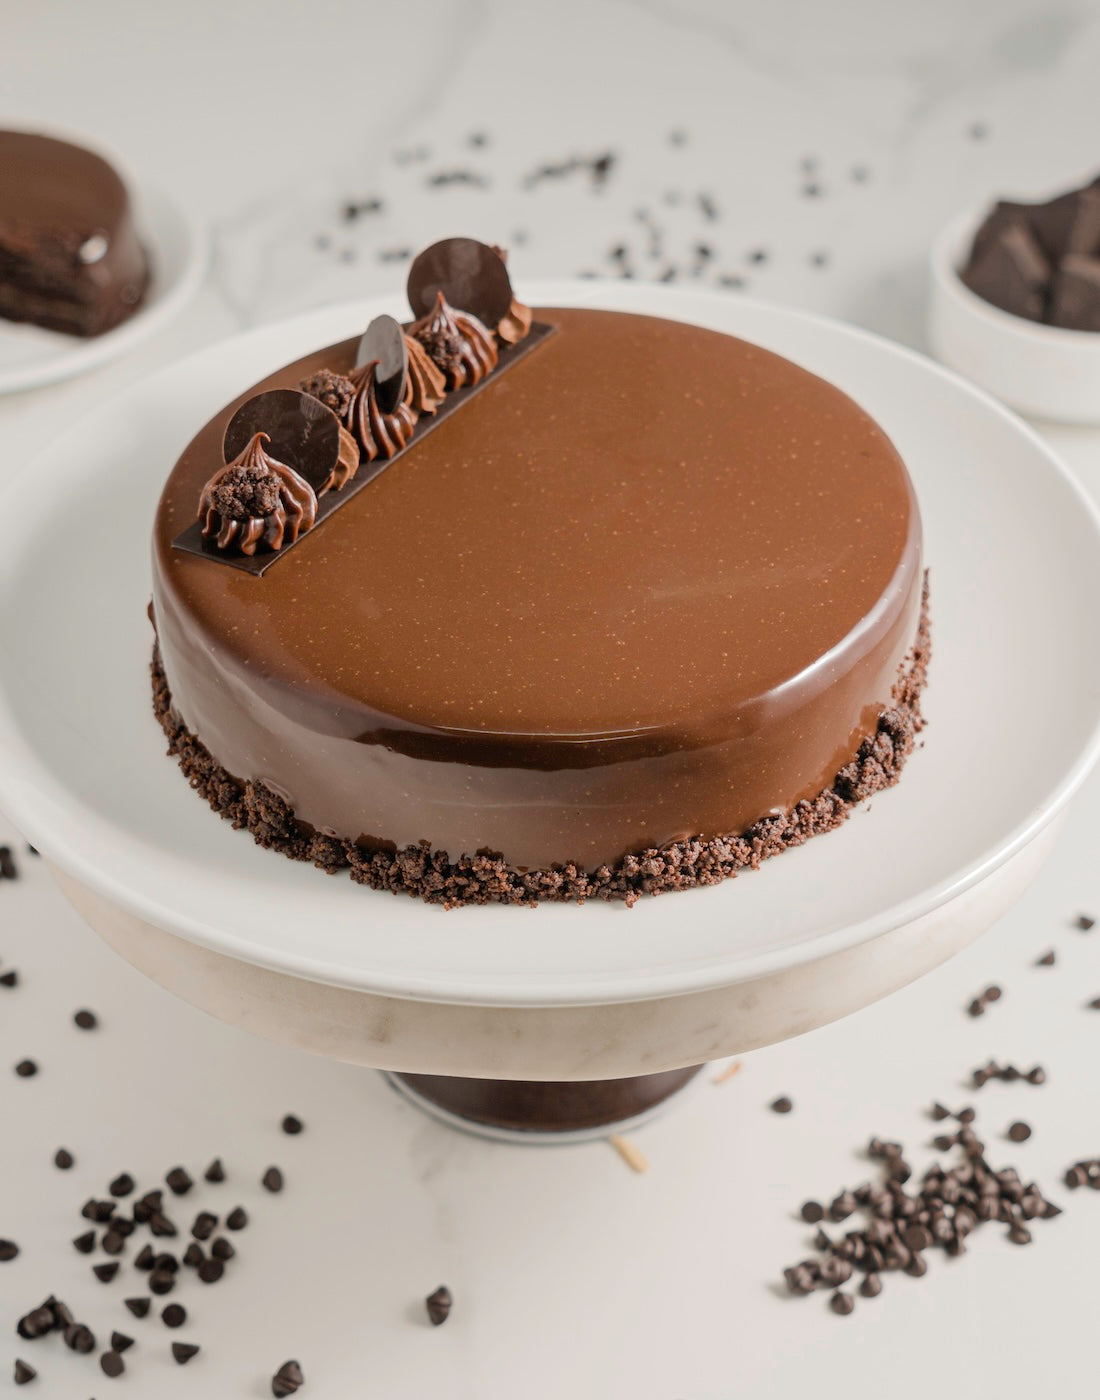 Cake Home Delivery, 3 Hour Delivery Noida, Chocolate Truffle Eggless